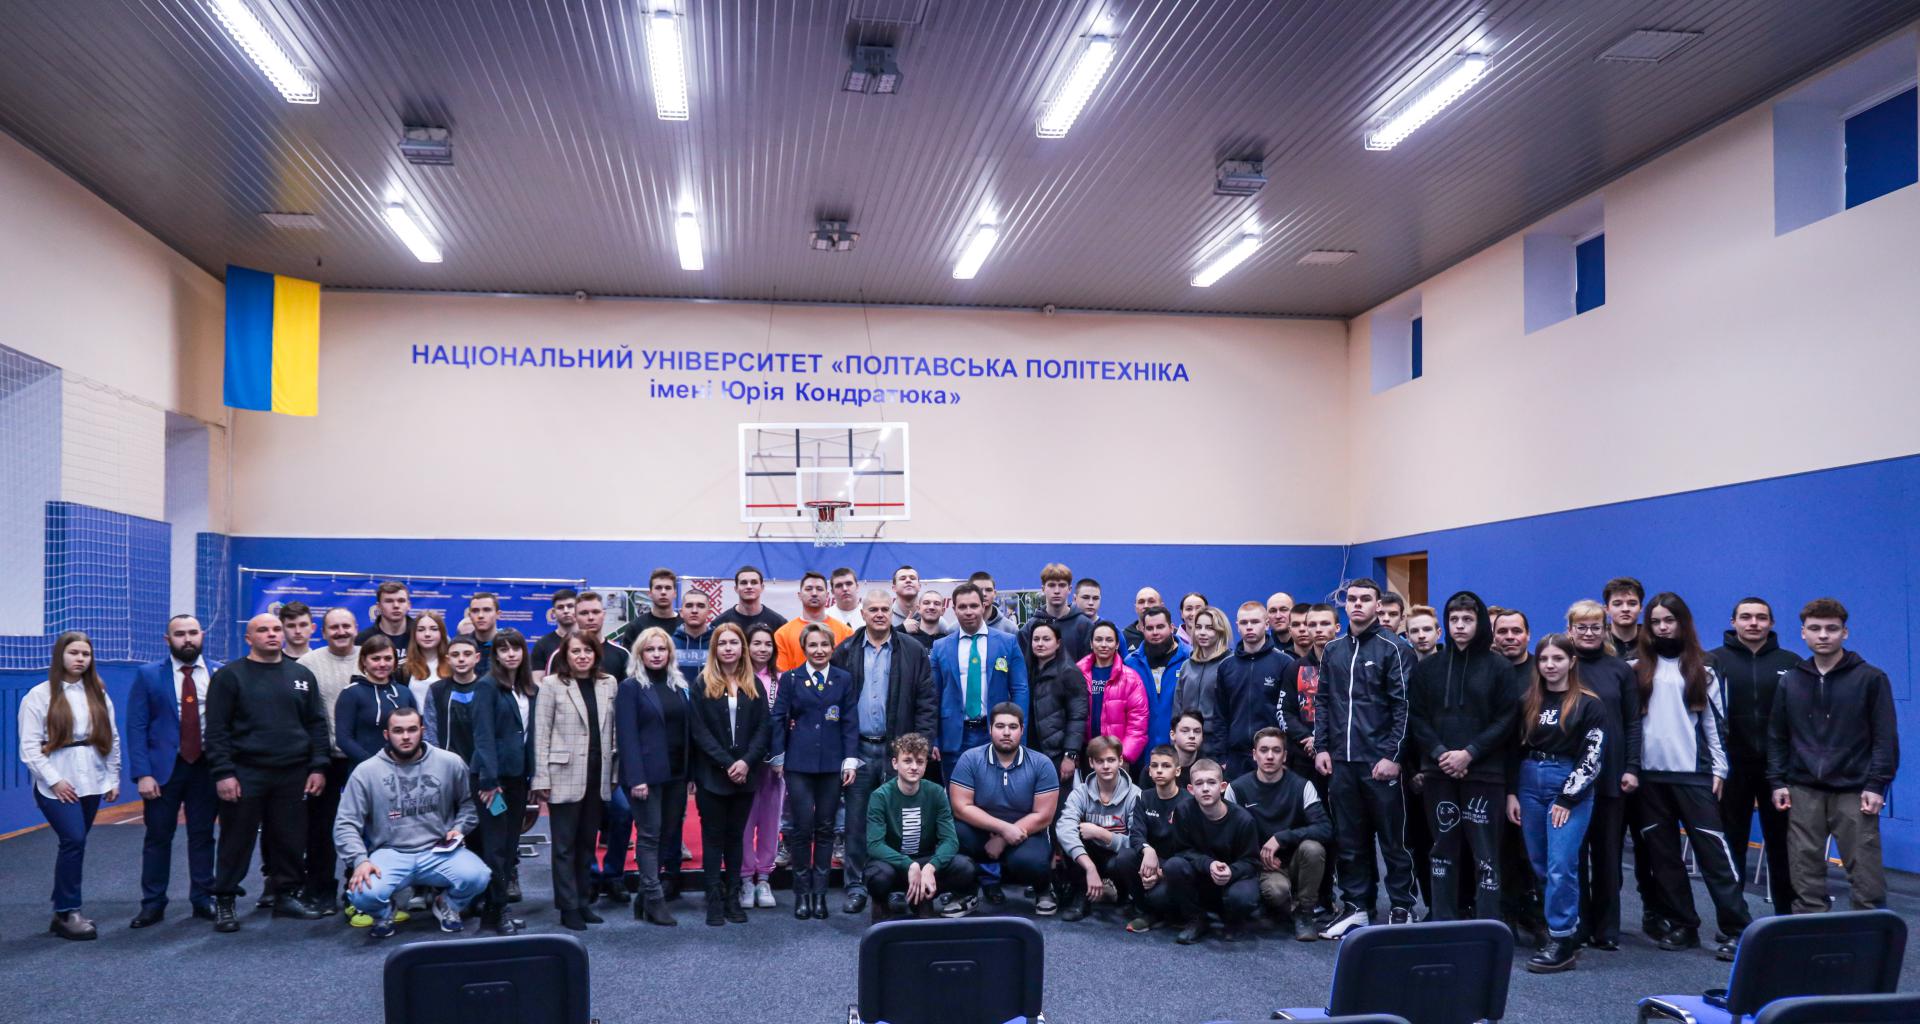 Poltava Region Classic Powerlifting Championship is held at the Polytechnic